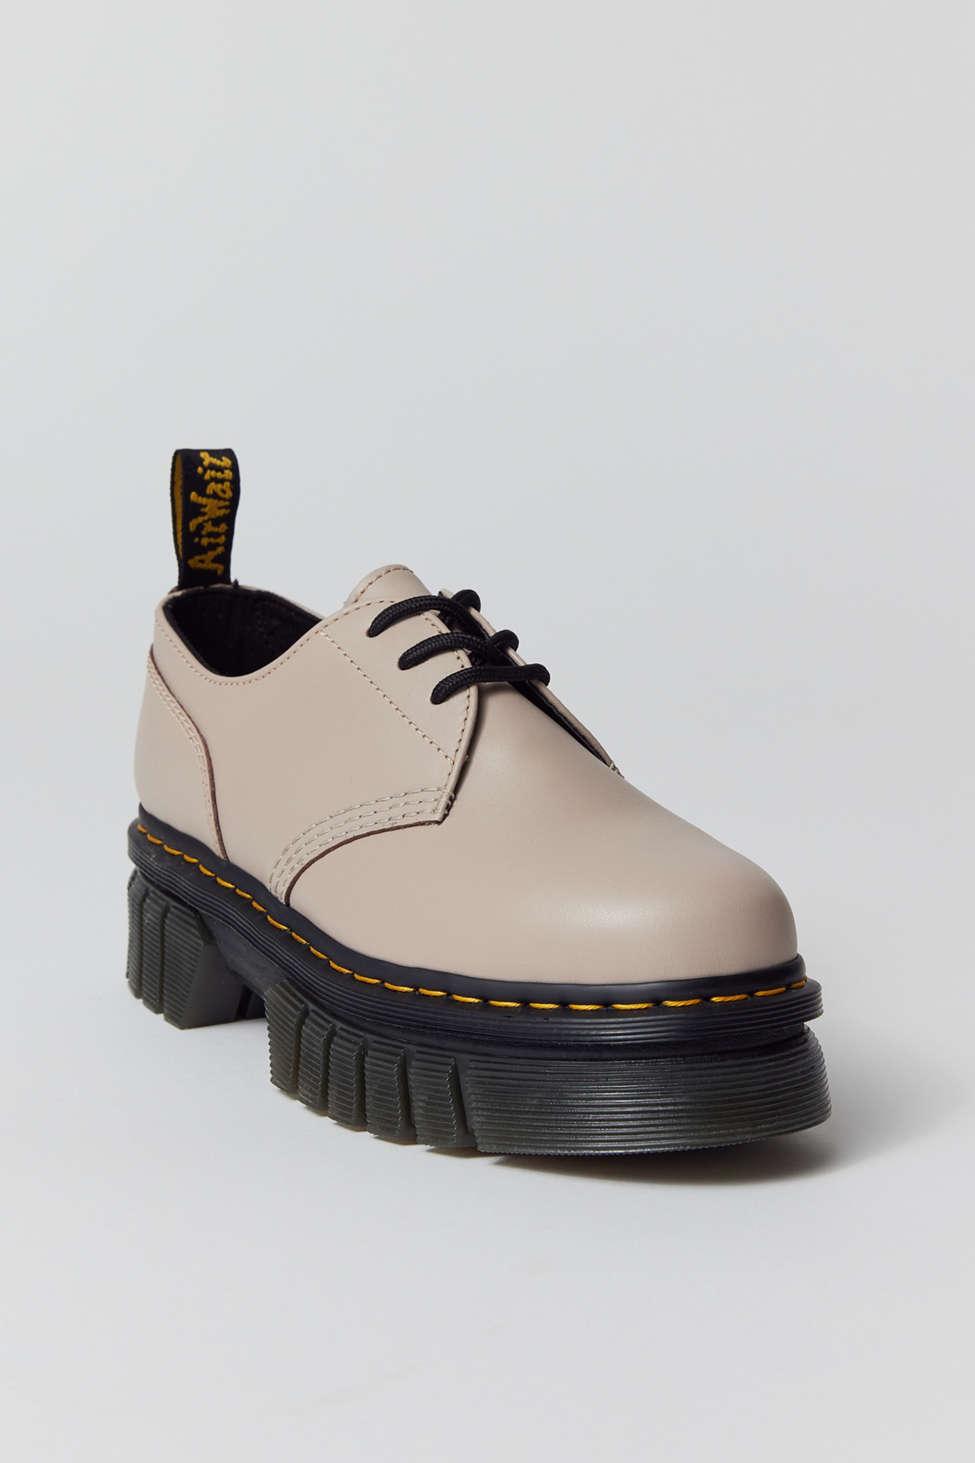 Dr. Martens Audrick Oxford Shoe Shoe In Taupe,at Urban Outfitters